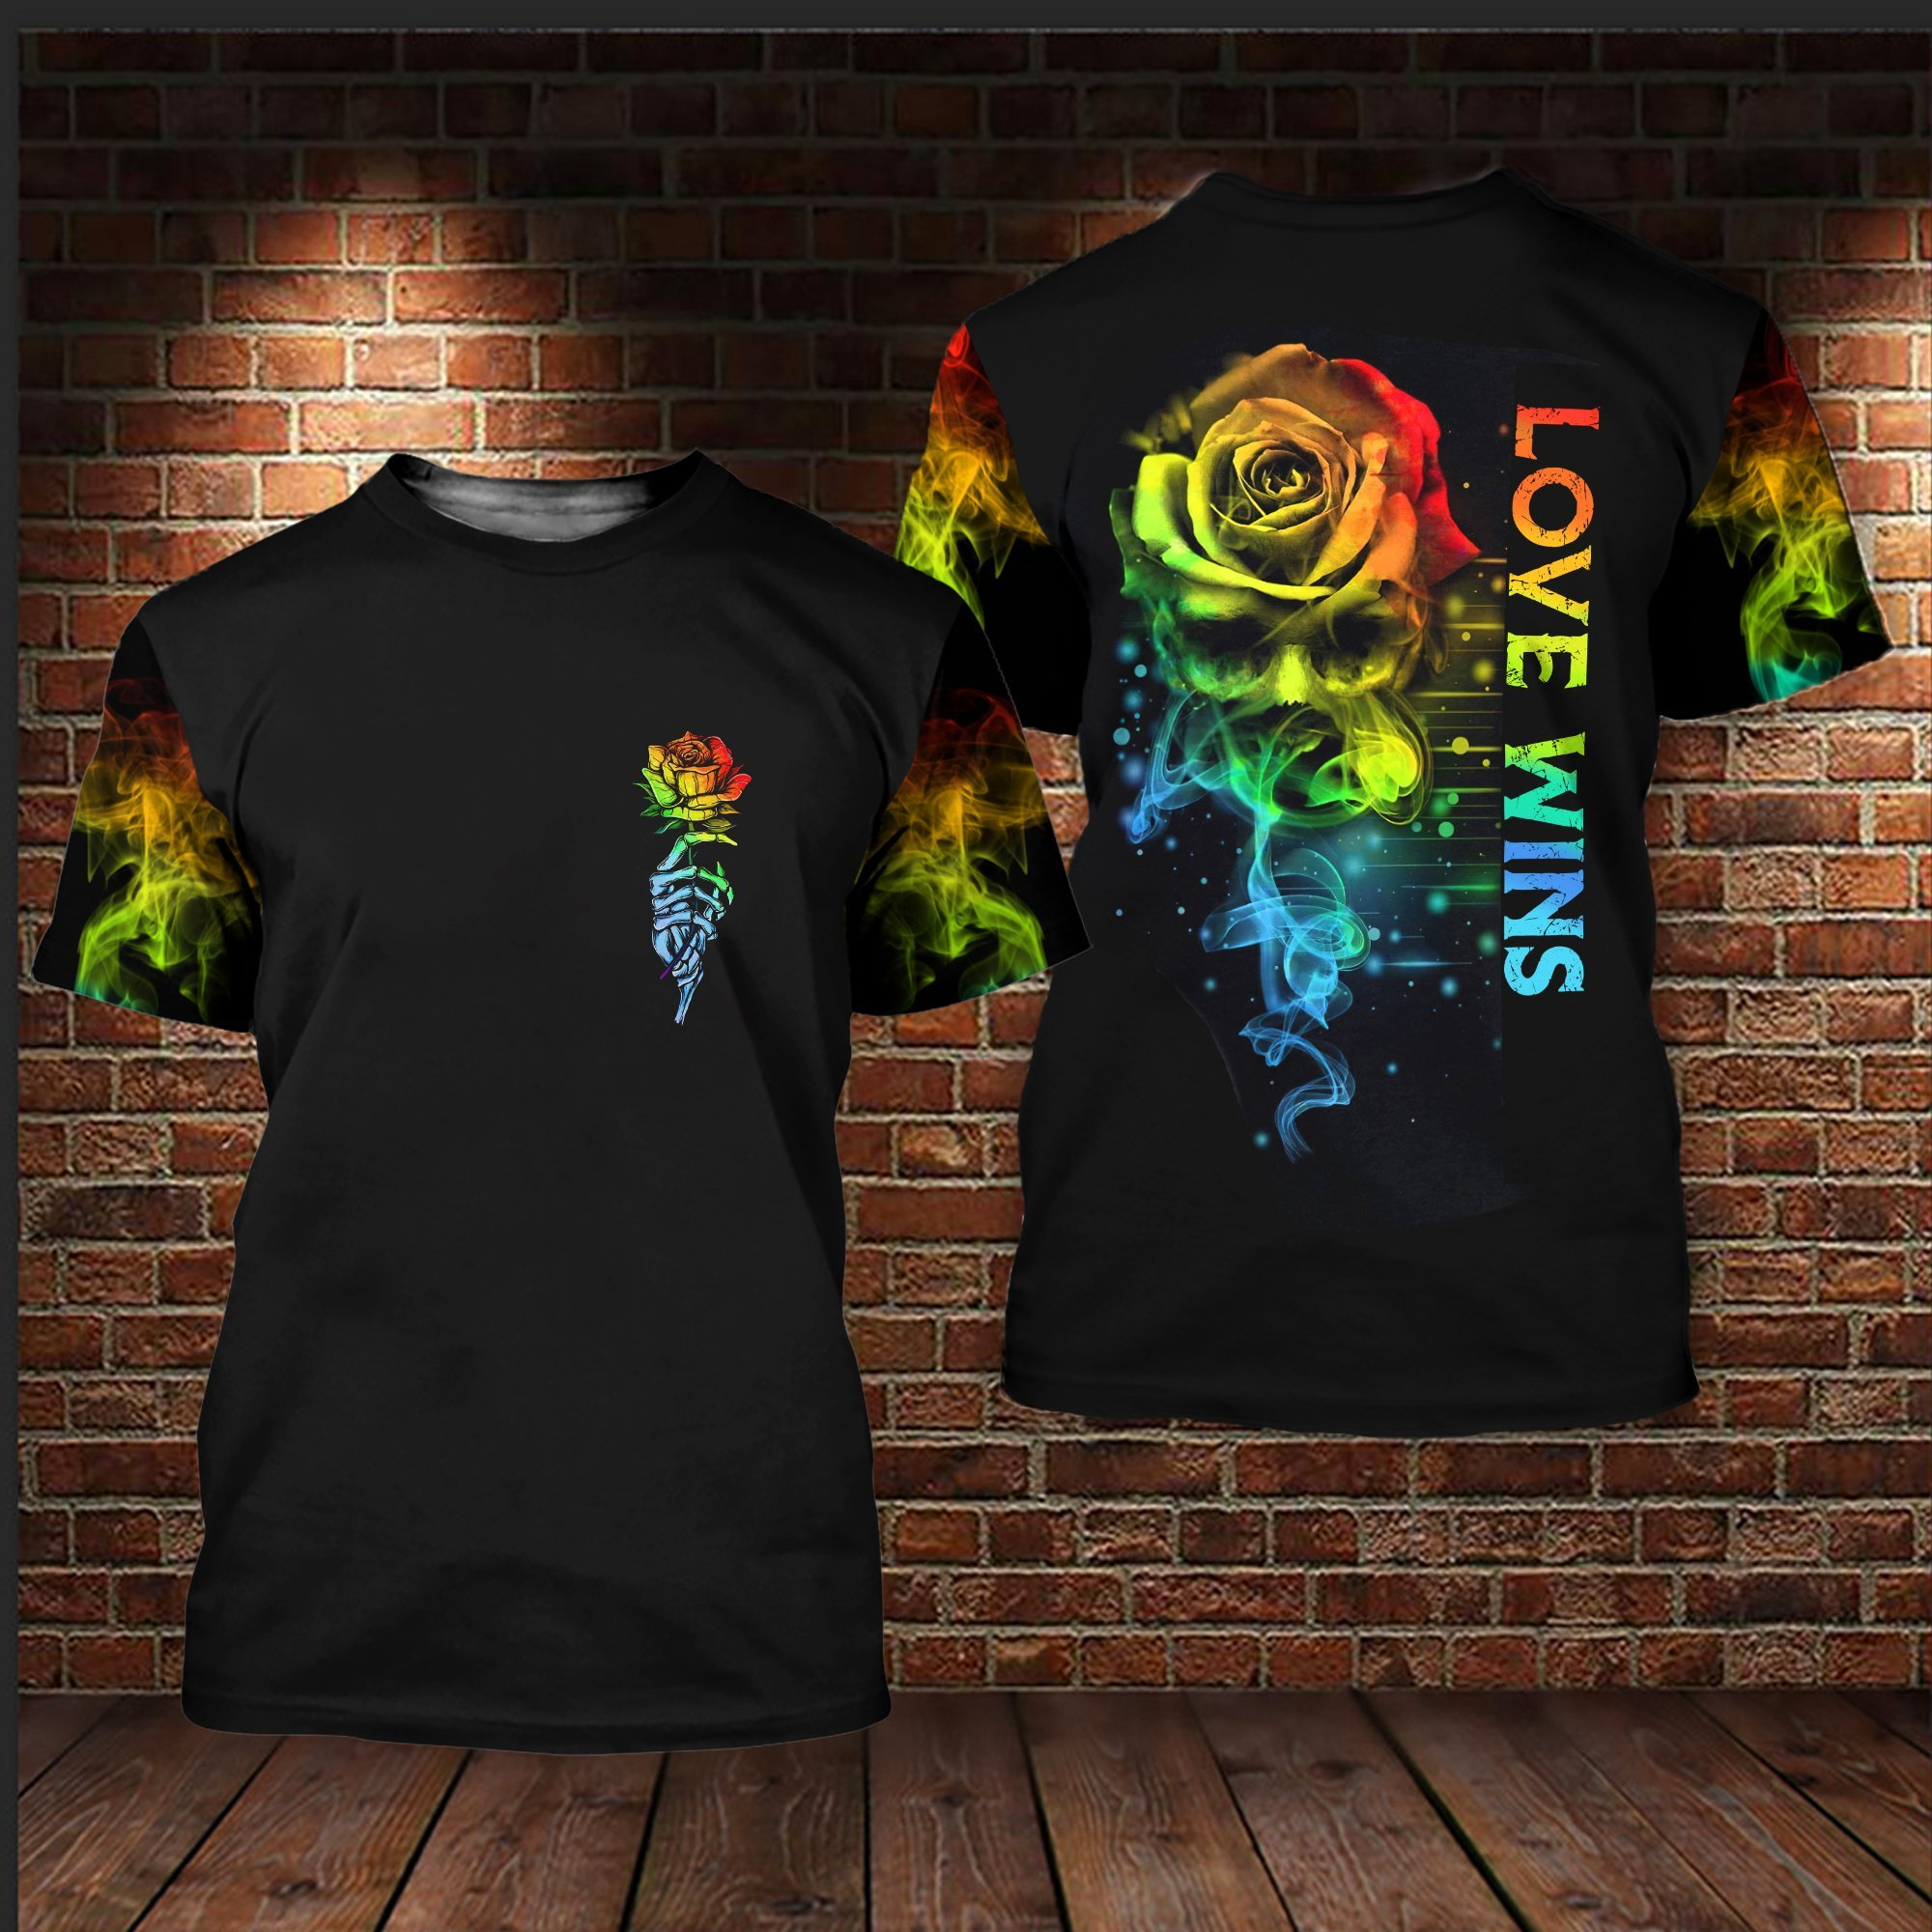 T Shirt Gift For LGBT Pride Month/ LGBT Love Wins Smoke Skull 3D All Over Printed Shirts For LGBT Community